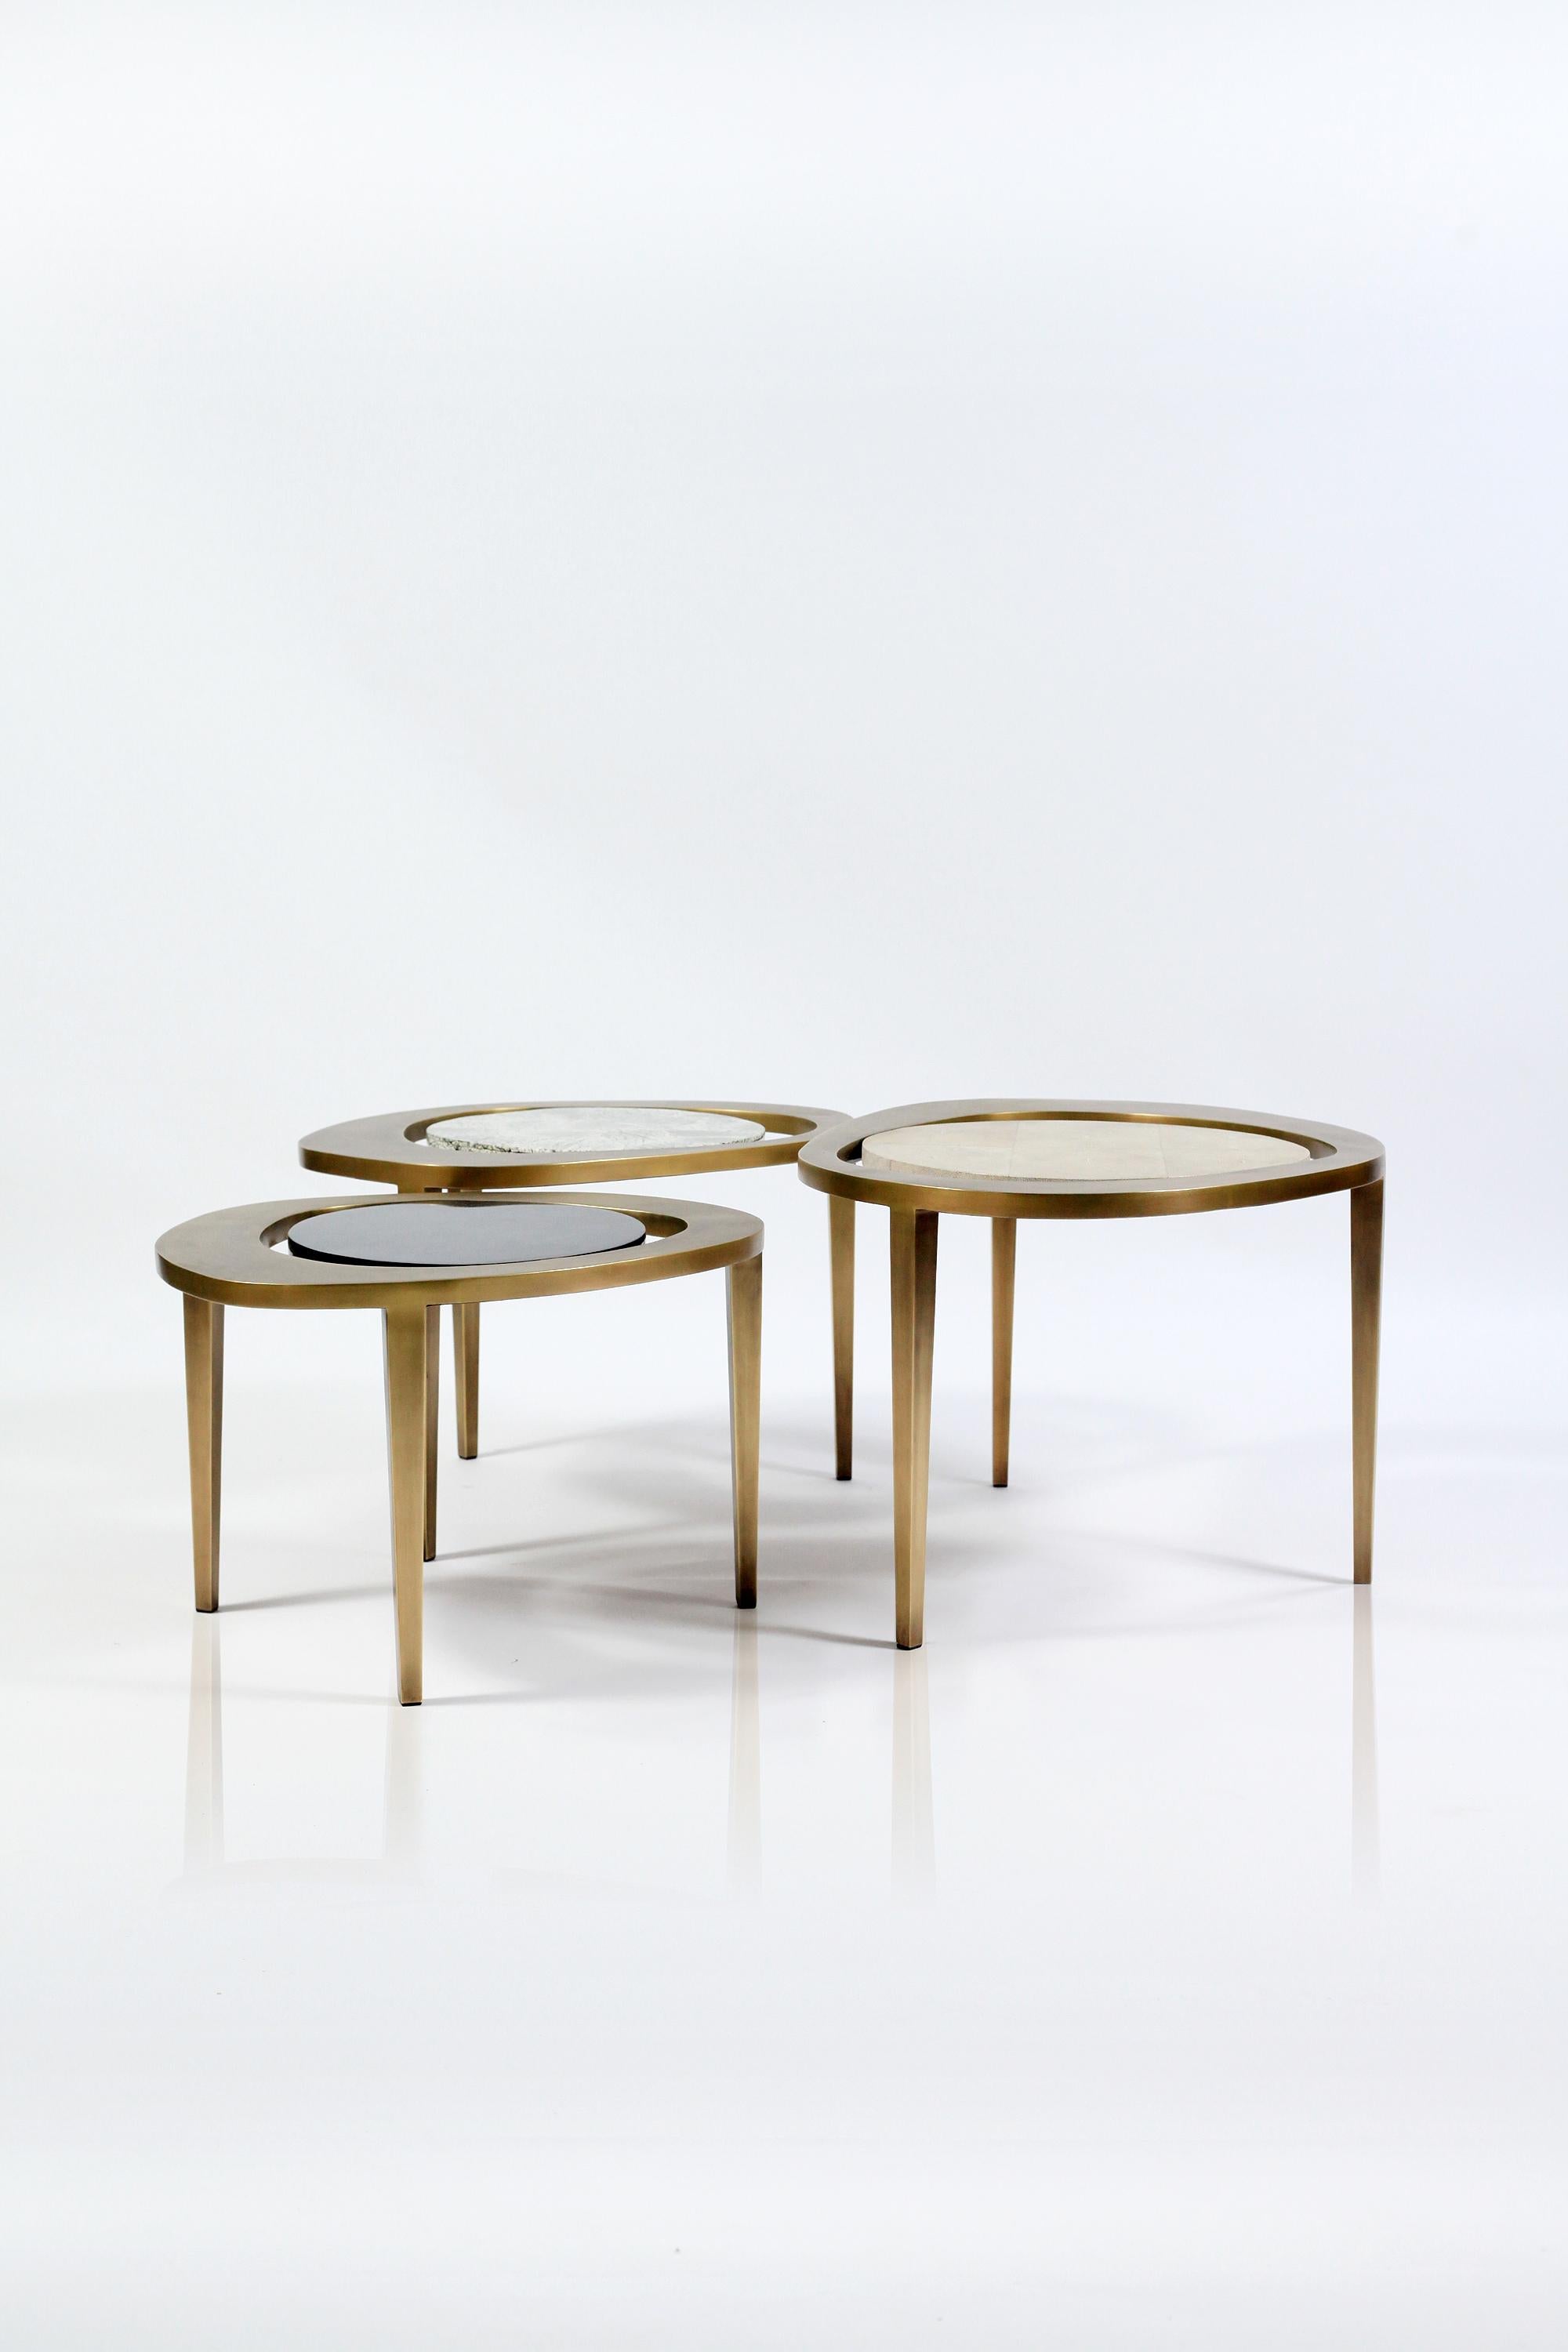 Set of 3 Peacock Nesting Side Tables in, Shagreen, Shell & Brass by R&Y Augousti For Sale 2